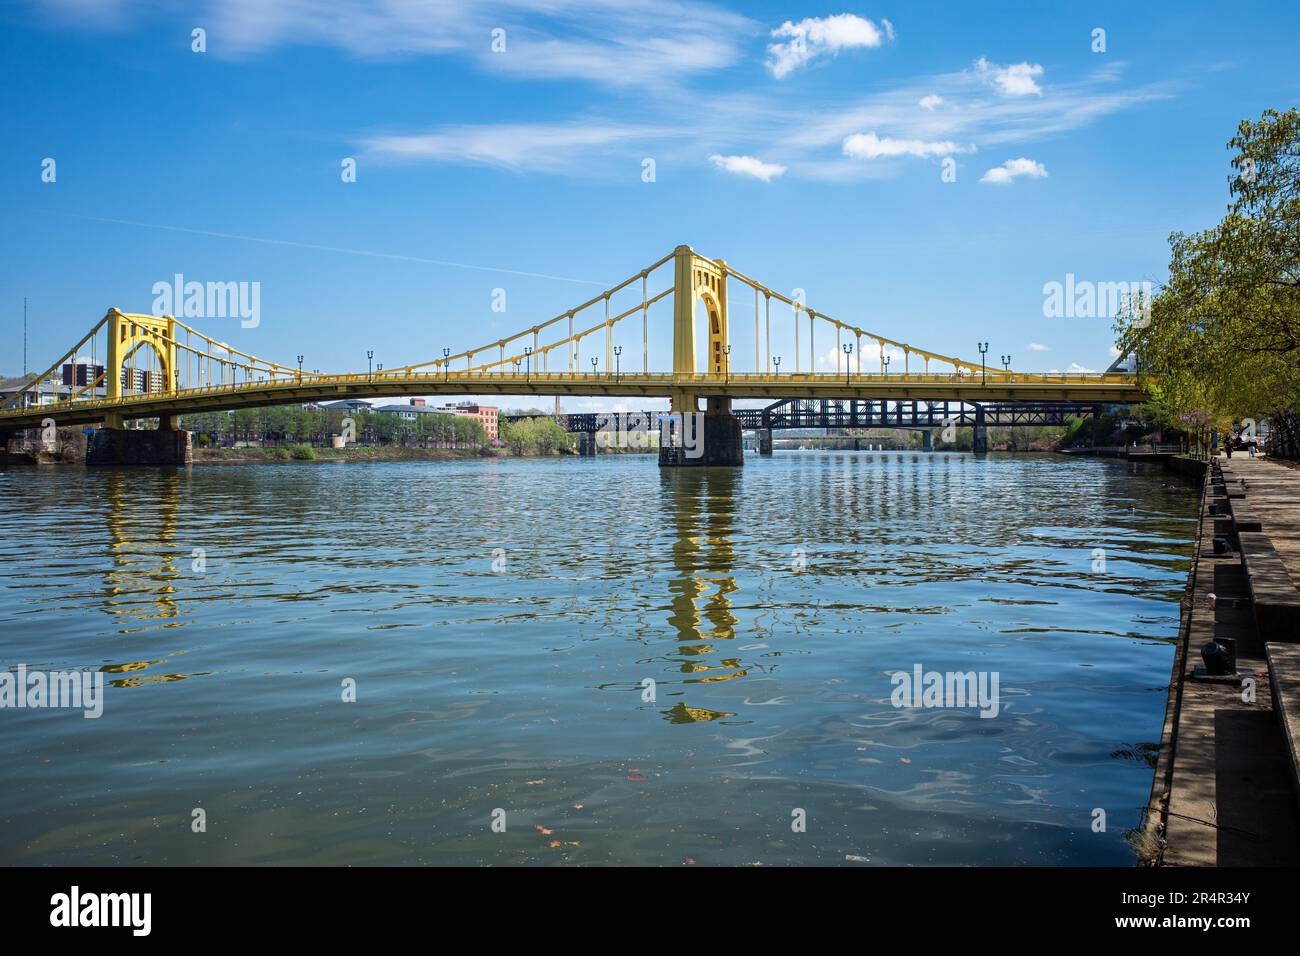 Rachel Carson bridge with a railroad bridge in the background, crossing the Allegheny River in Pittsburgh, Pennsylvania. Stock Photo